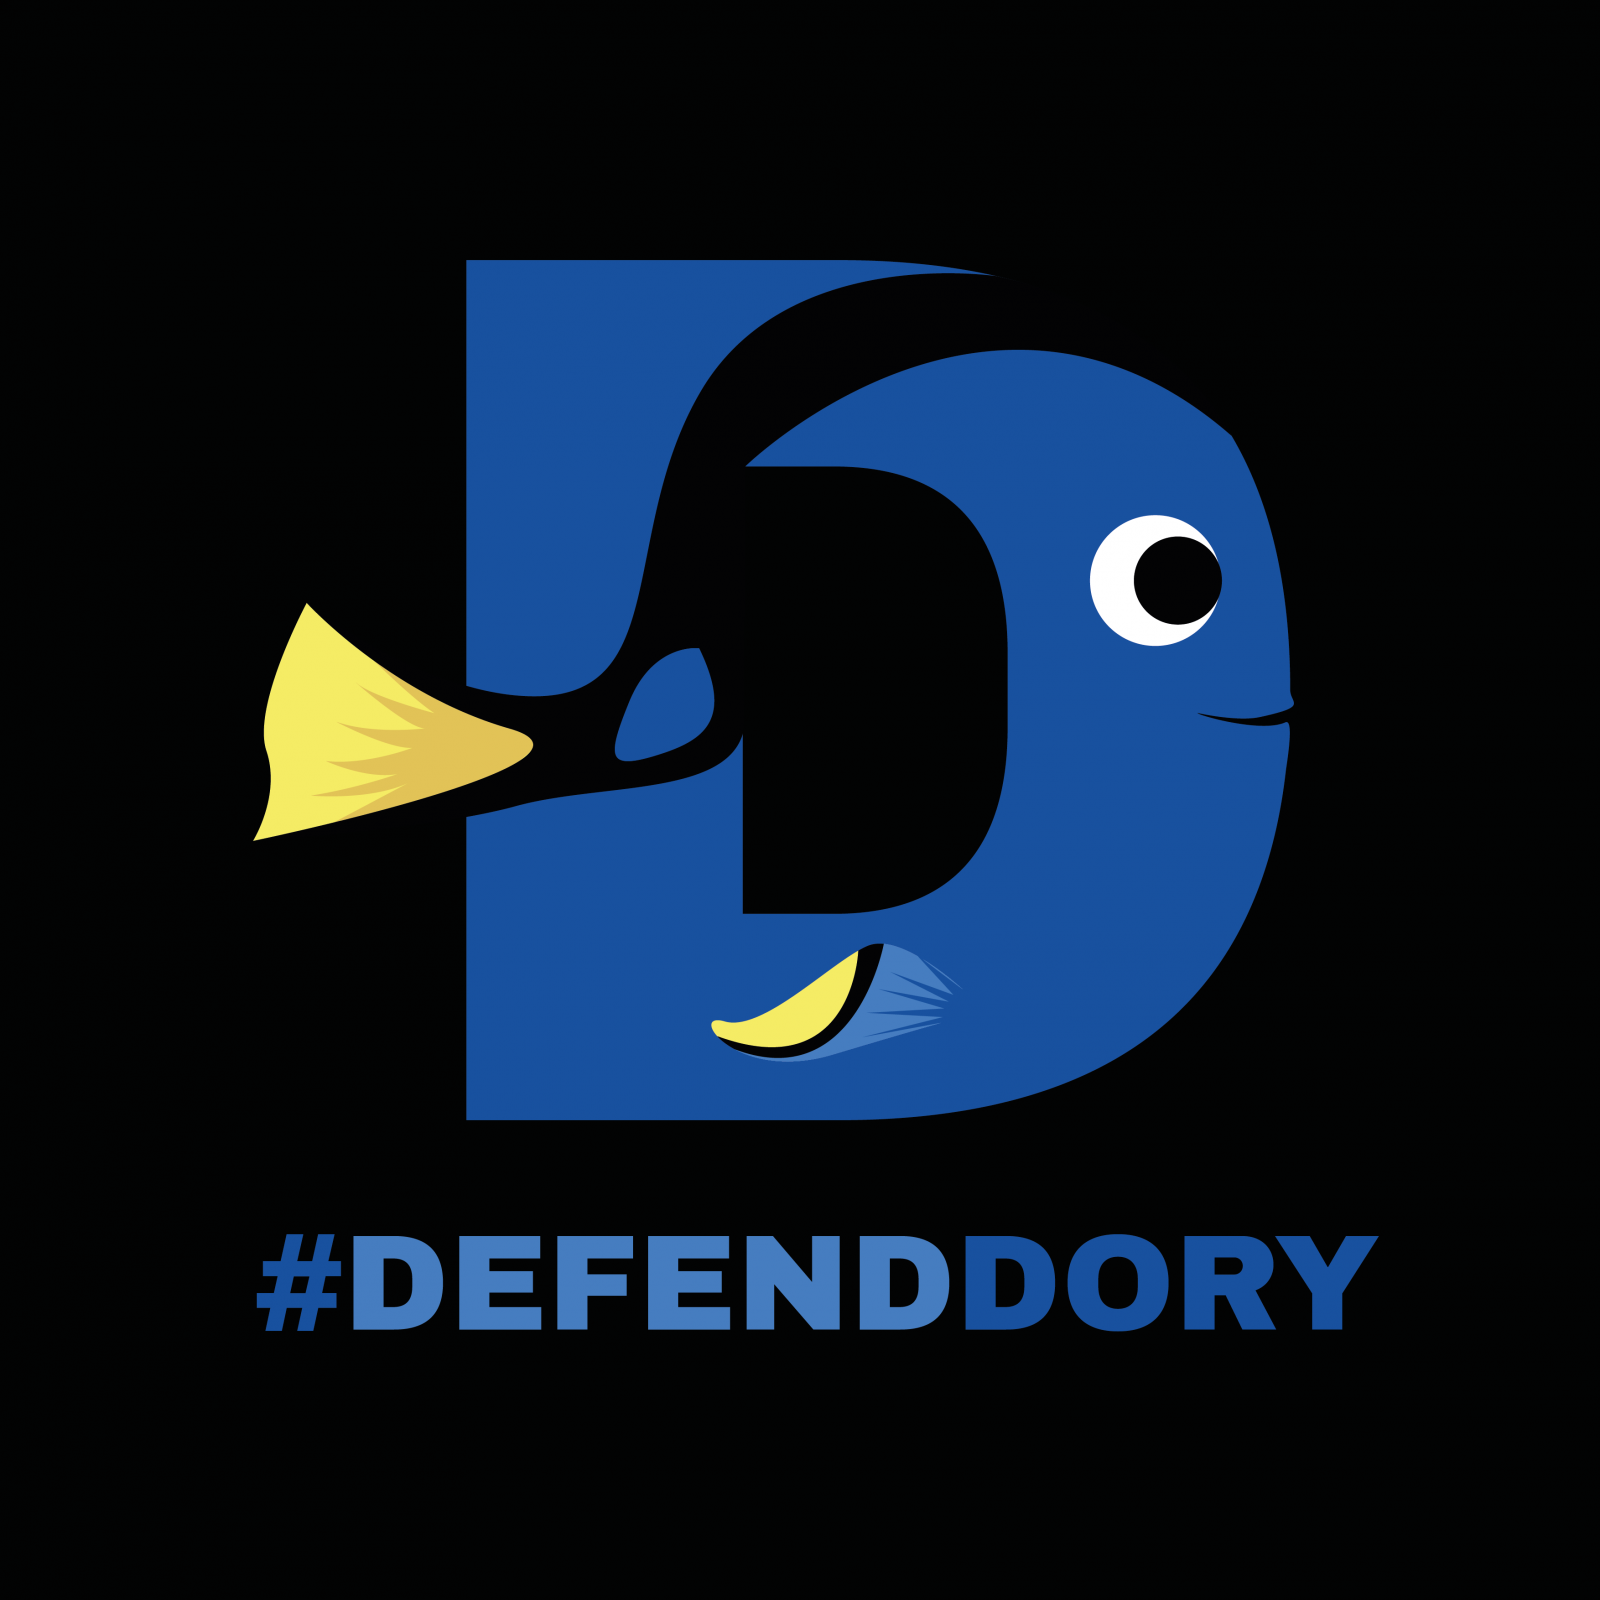 change your social media profile pictures for the #DEFENDORY campaign